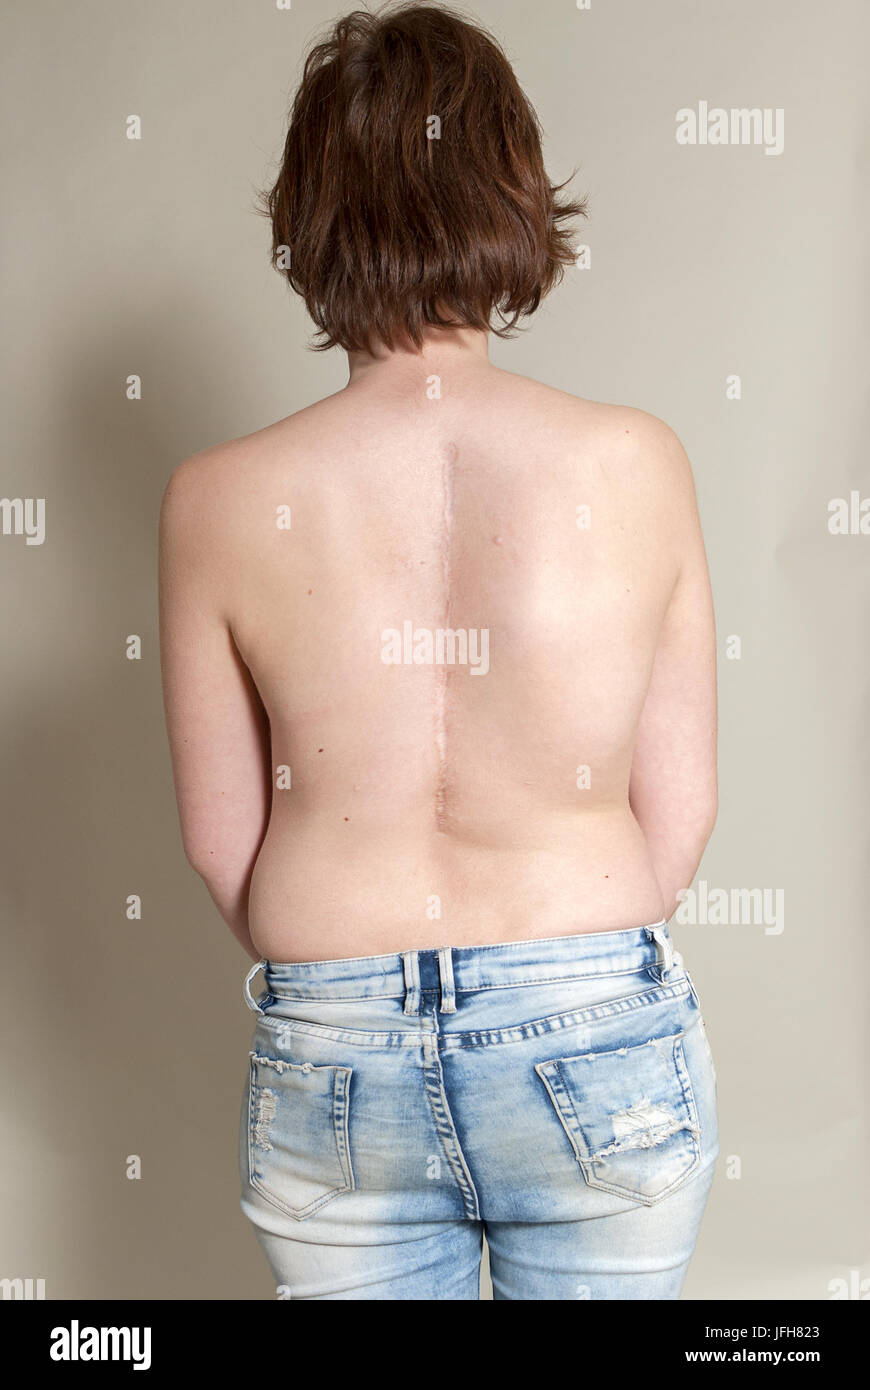 Woman having pain, muscle or chronic nerve pain in her back, sitting on  chair. Diseases of musculoskeletal system, spine, scoliosis, osteoporosis  Stock Photo - Alamy